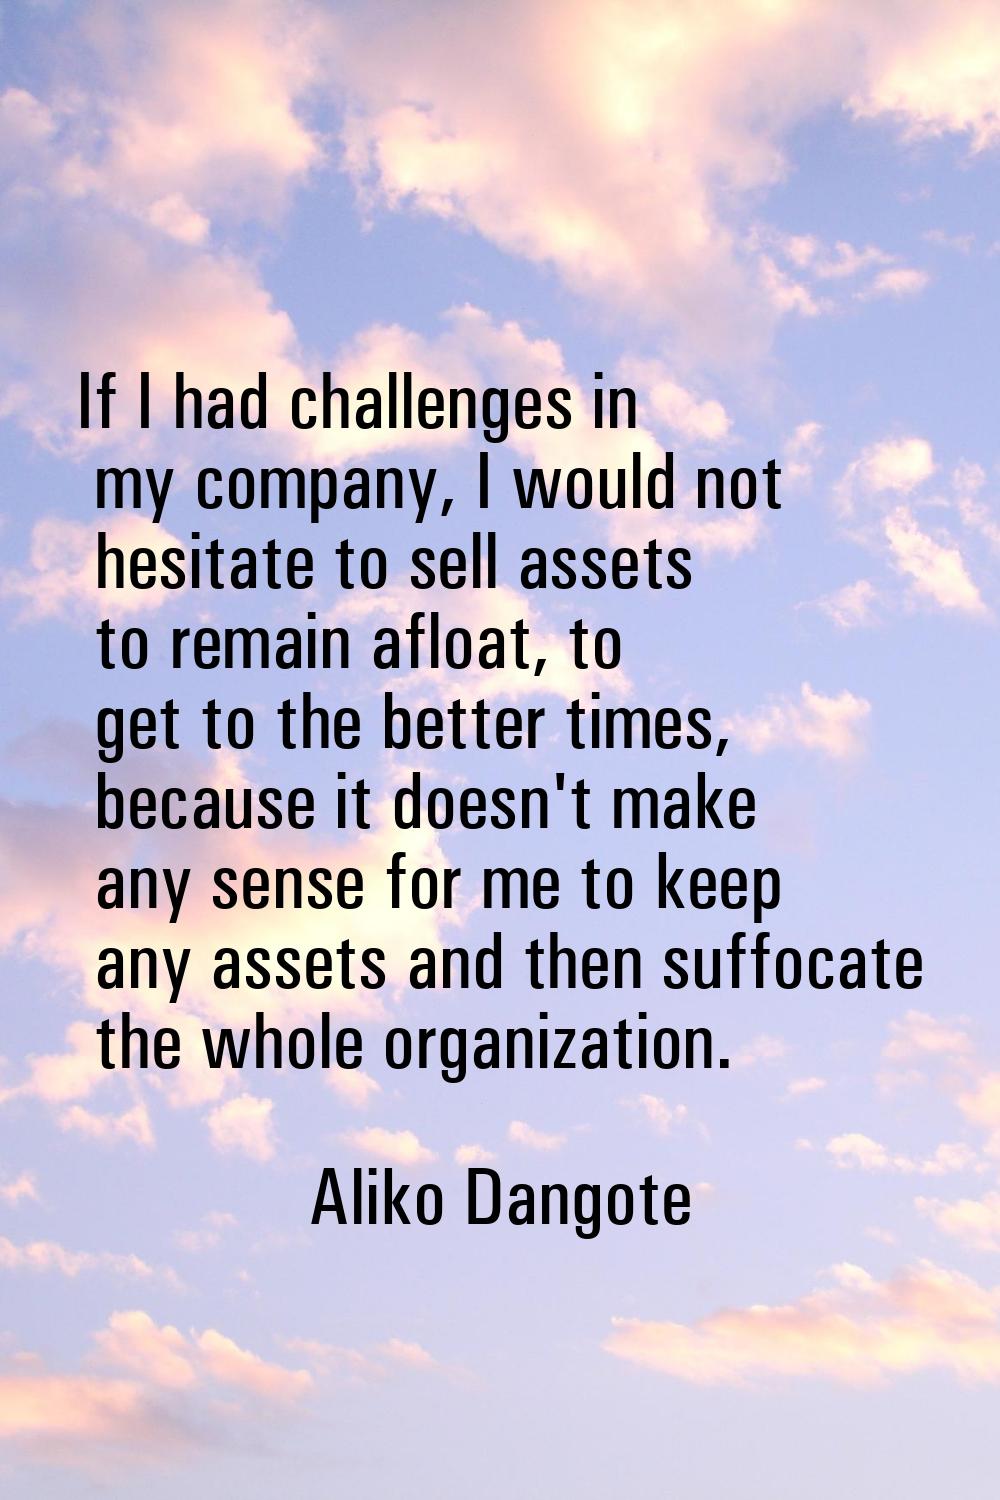 If I had challenges in my company, I would not hesitate to sell assets to remain afloat, to get to 